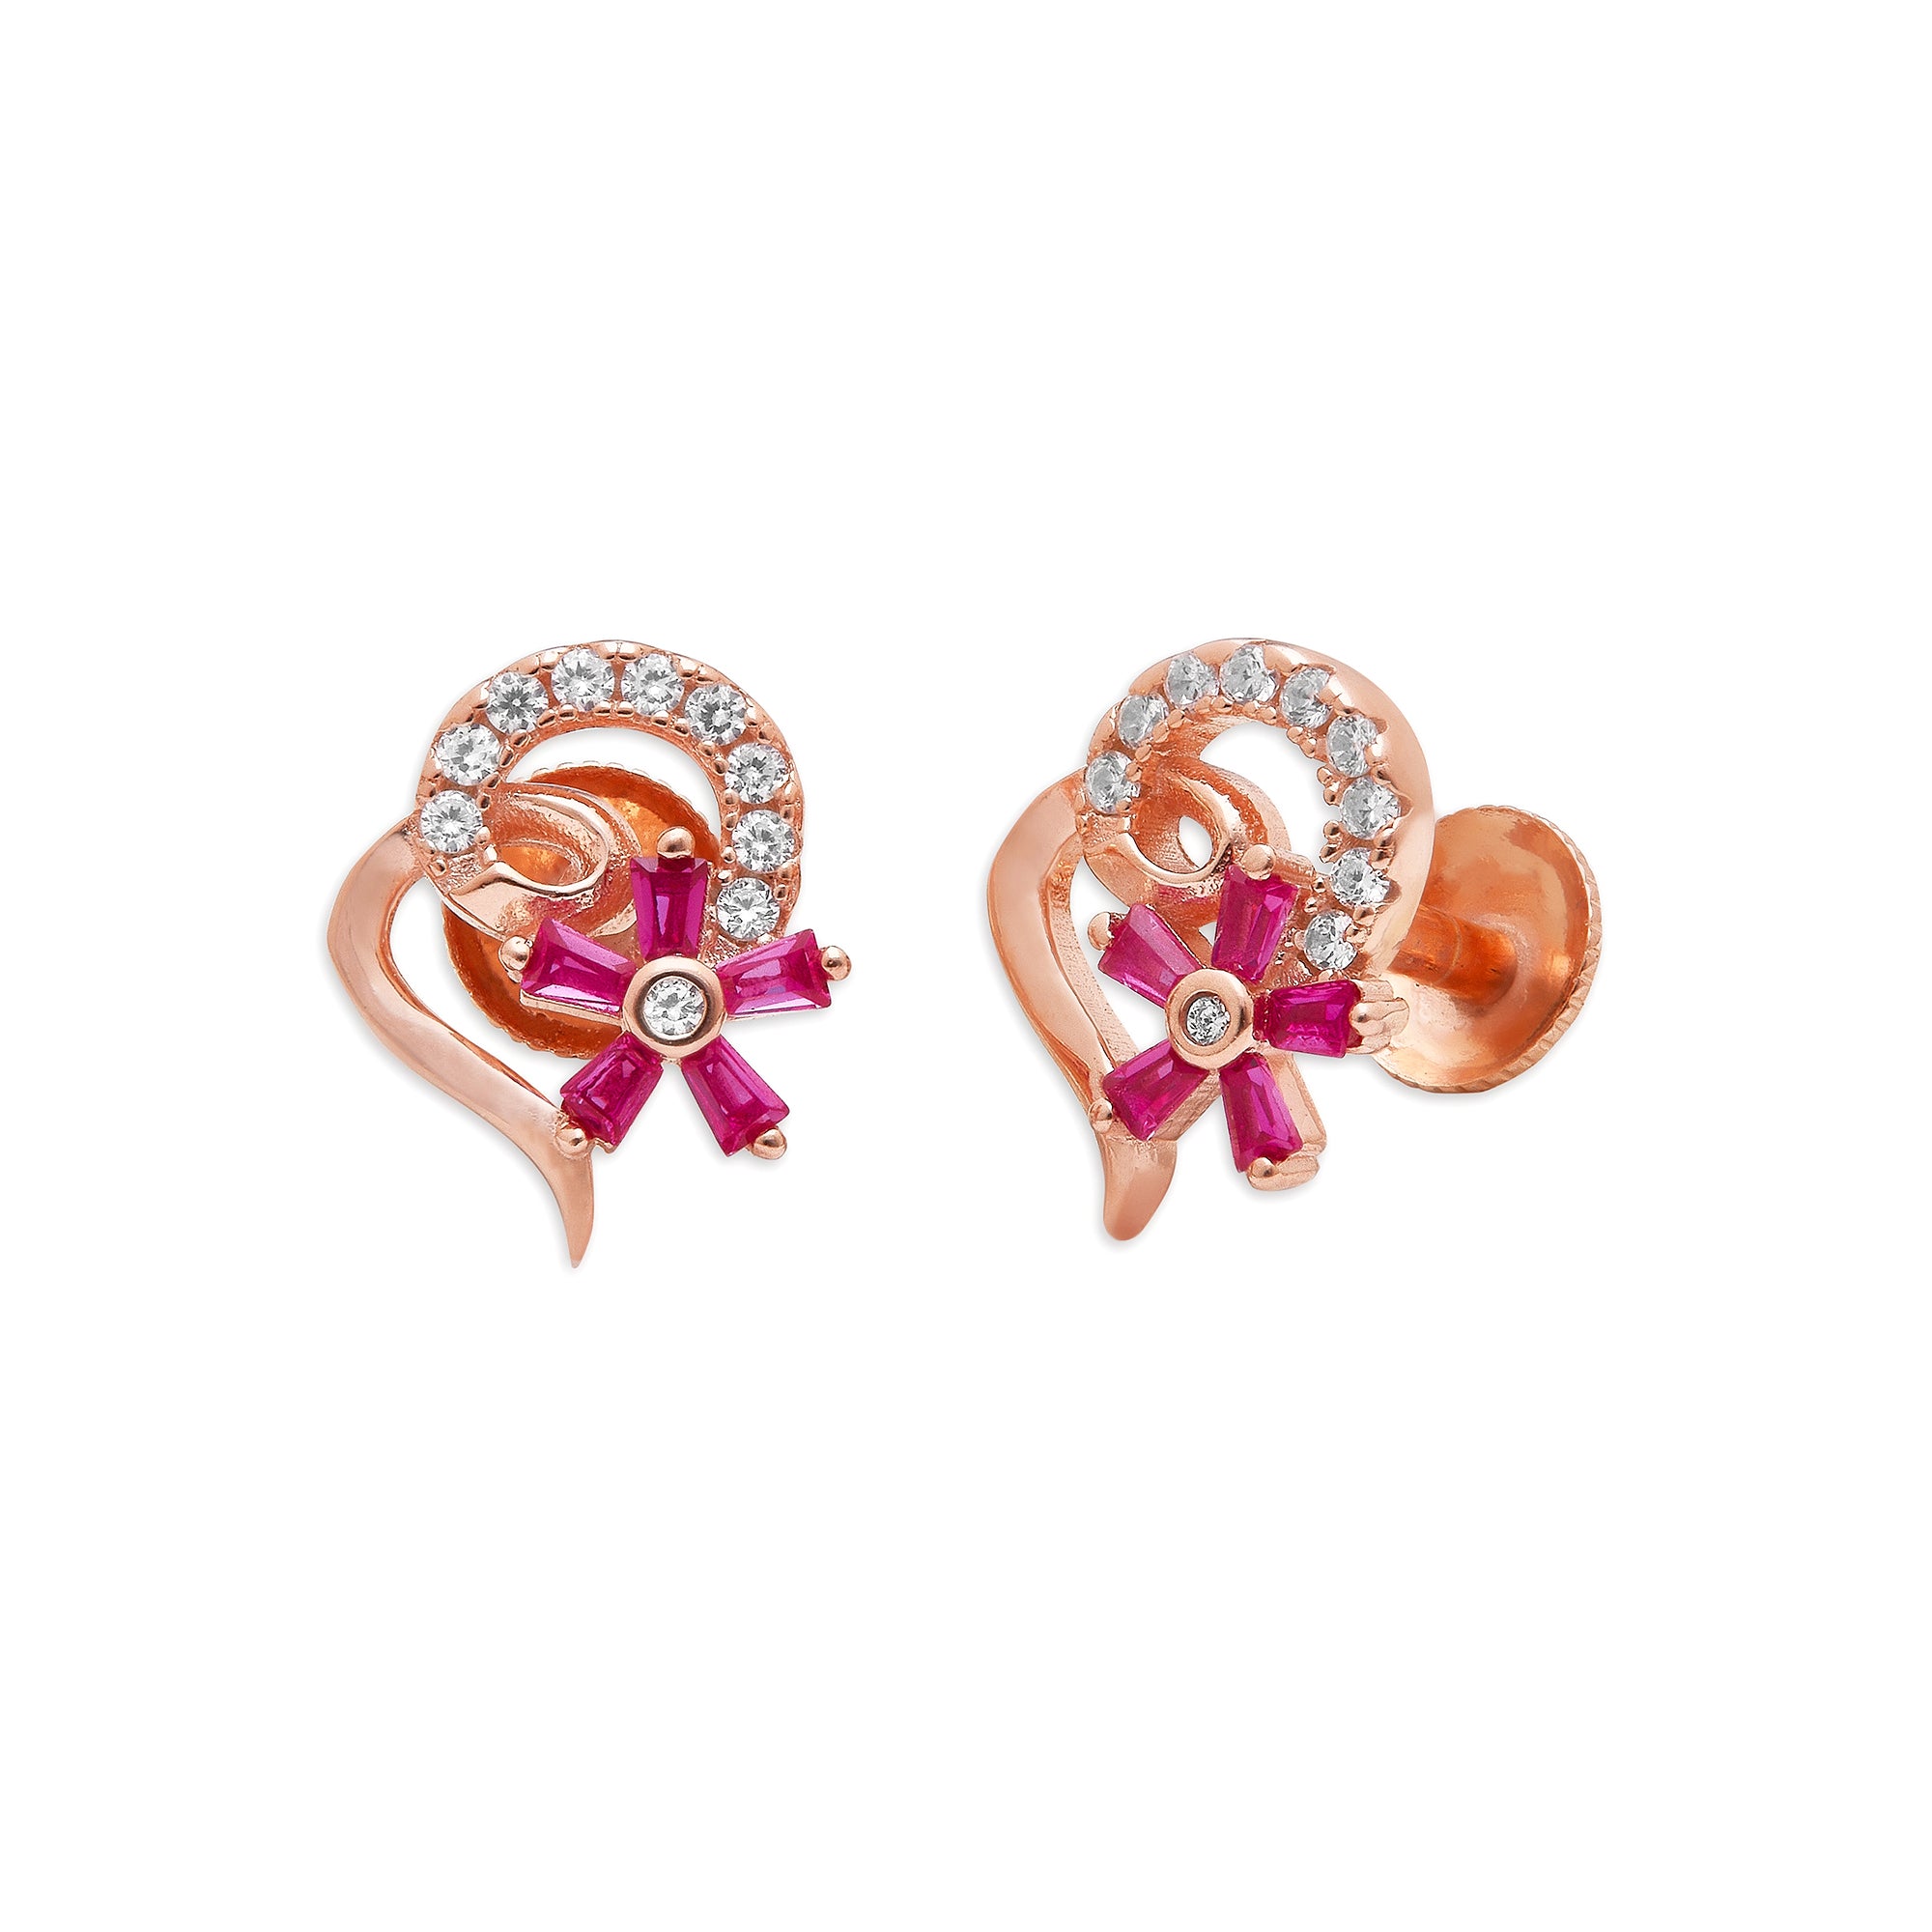 Blooming Rose Garden Rose Gold-Plated 925 Sterling Silver Jewelry Set